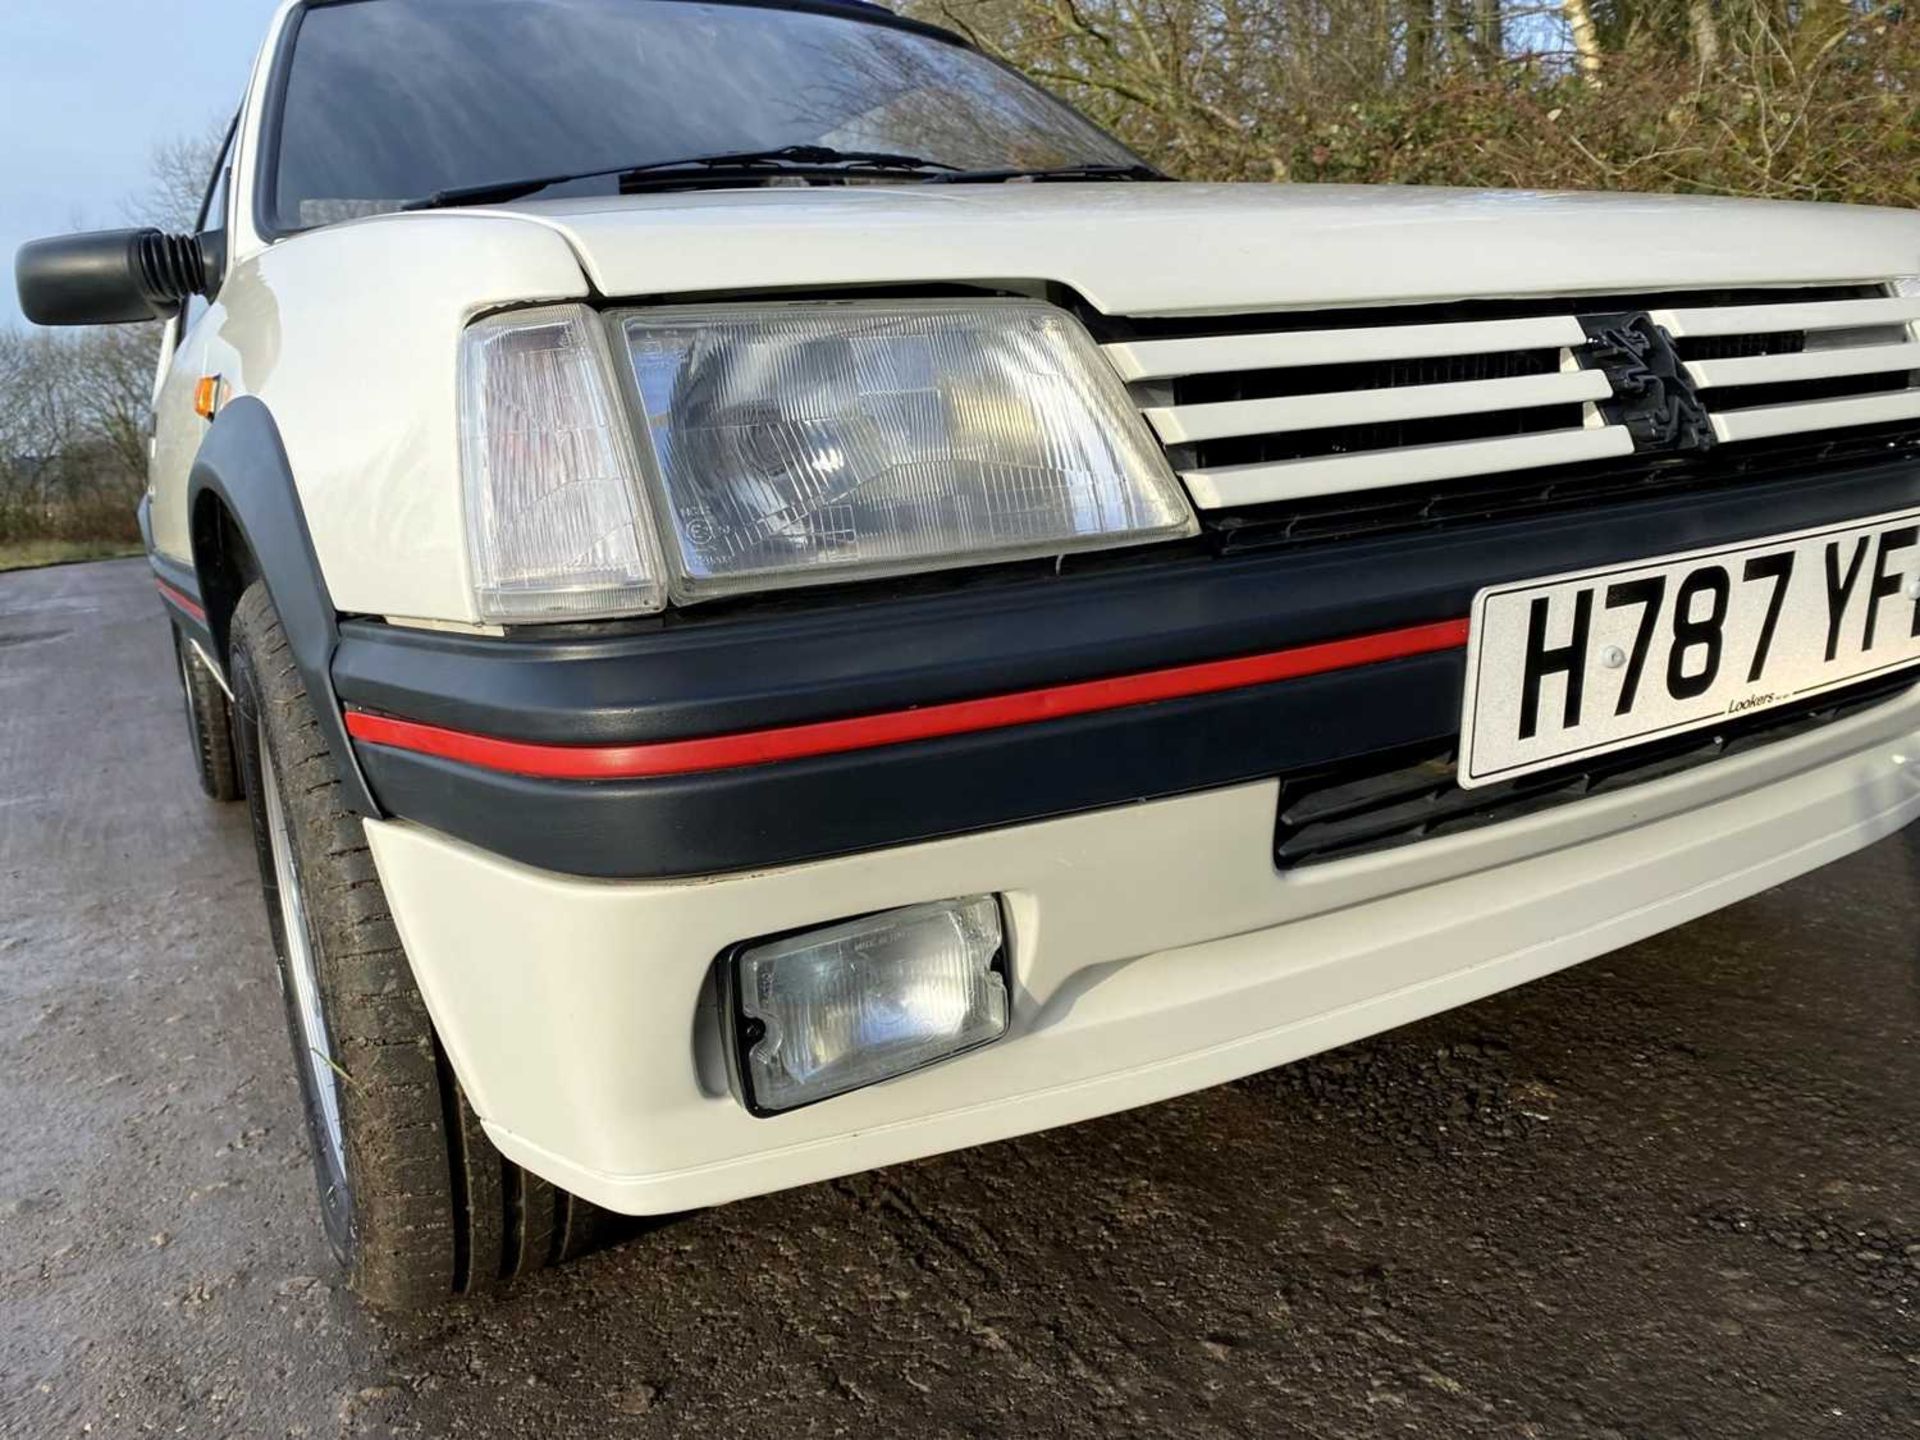 1990 Peugeot 205 GTi 1.6 Only 56,000 miles, same owner for 16 years - Image 51 of 81